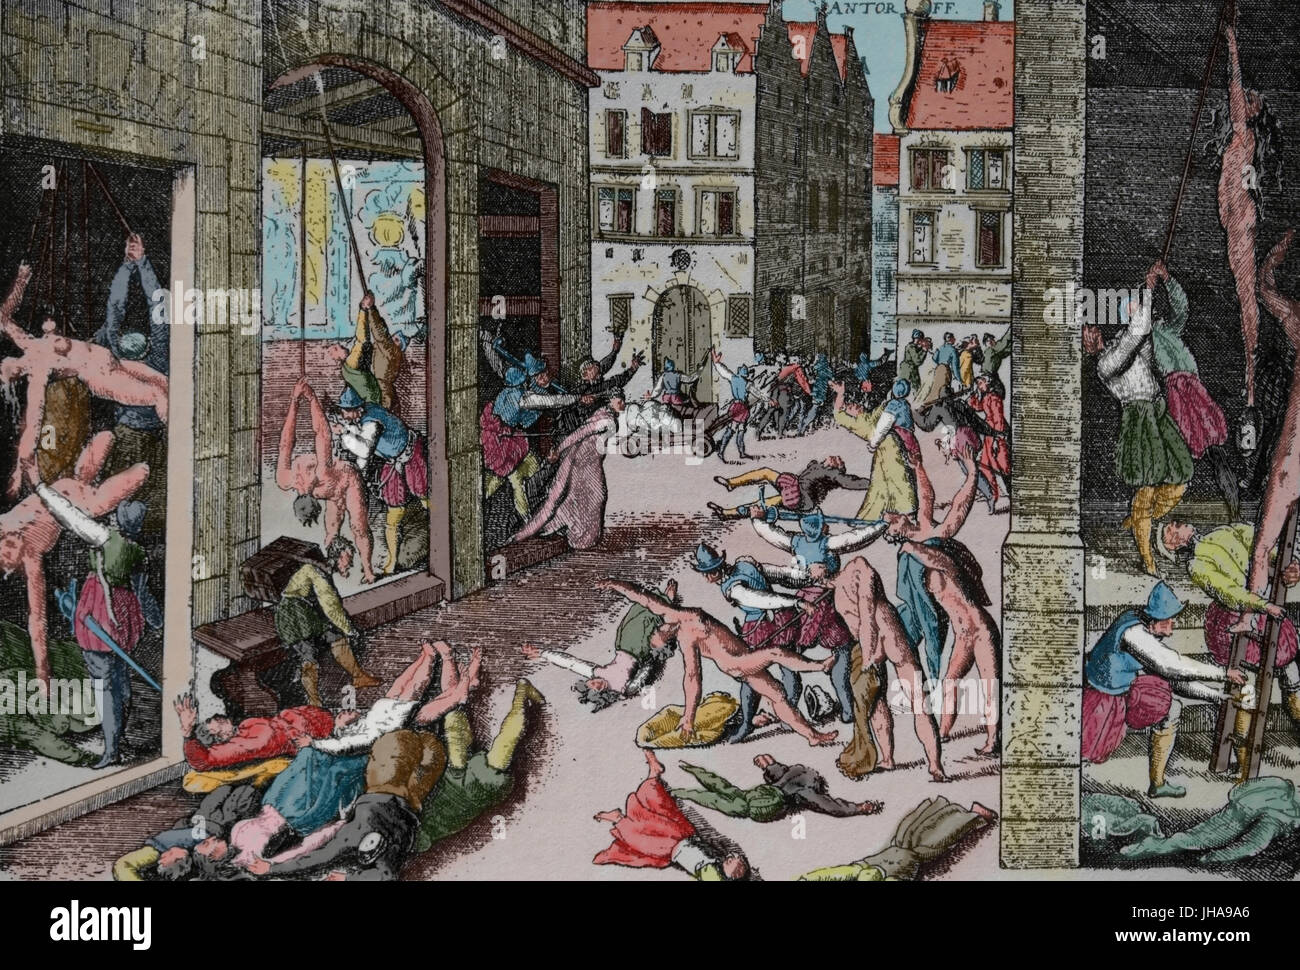 Torture of the inhabitans of Antwerp of Spanish army of Duke de Alba. Eighty Years' War, 1576. Engraving, color. 16th century. Stock Photo